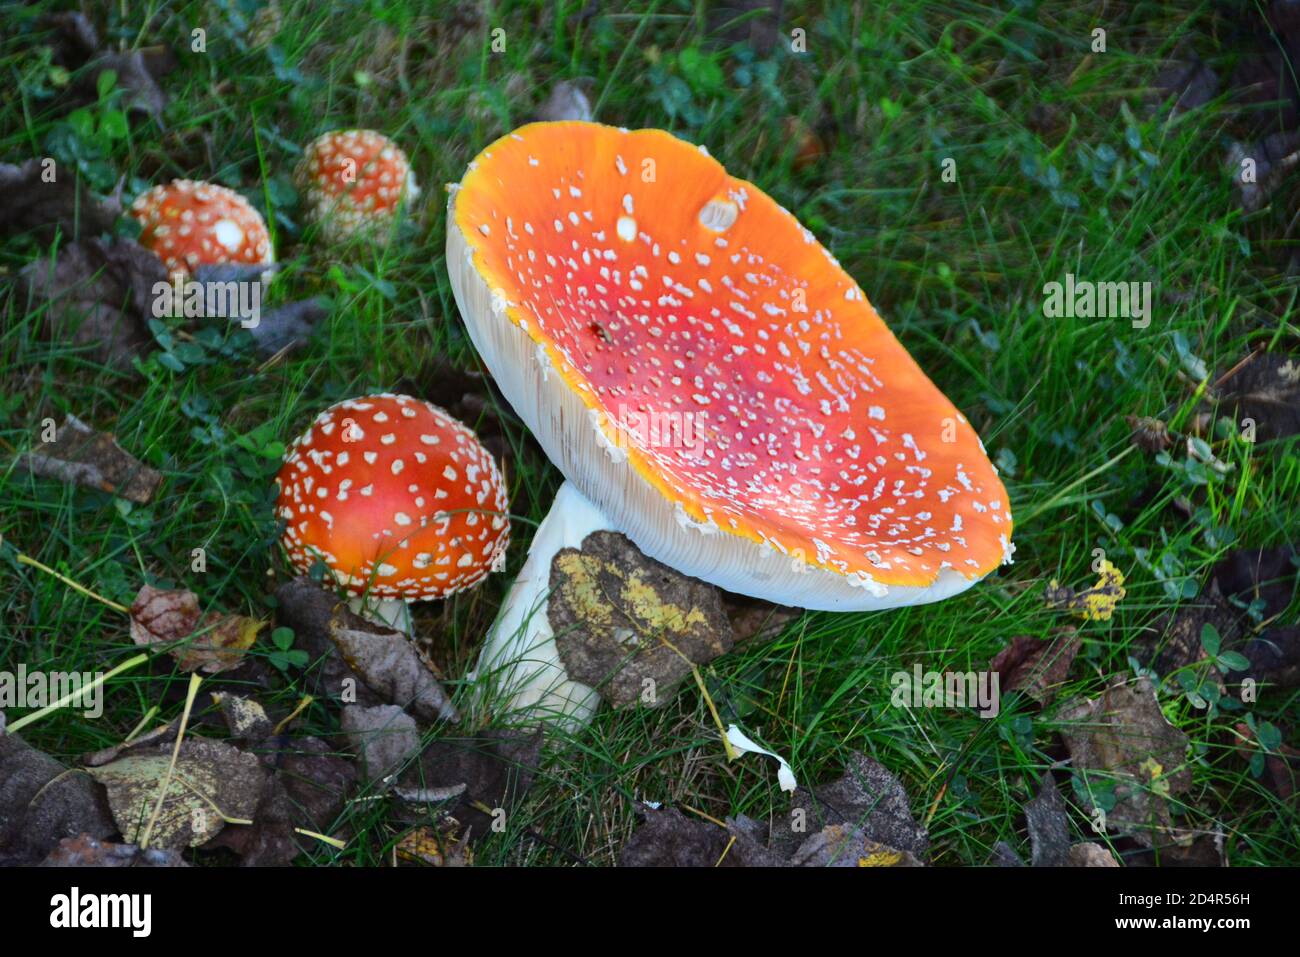 Amanita Mushroom (Amanitaceae). One of the world's most toxic fungi. Responsible for over half of all cases of mushroom poisoning. 6 inches diameter. Stock Photo